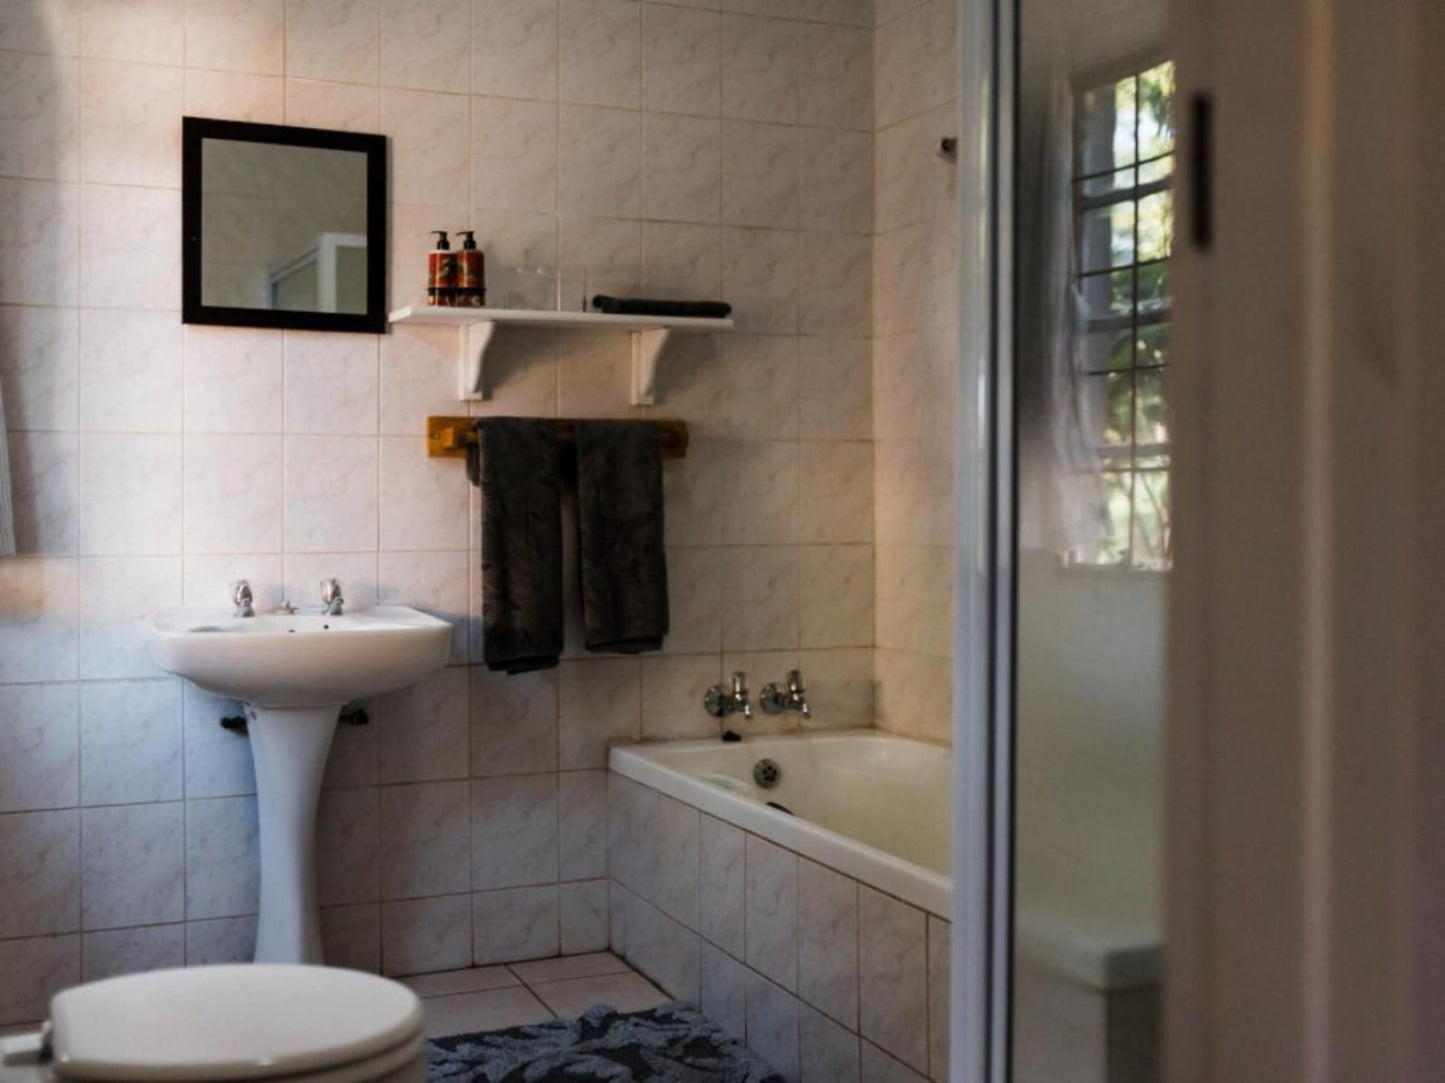 Cussonia Cottage Haenertsburg Limpopo Province South Africa Unsaturated, Bathroom